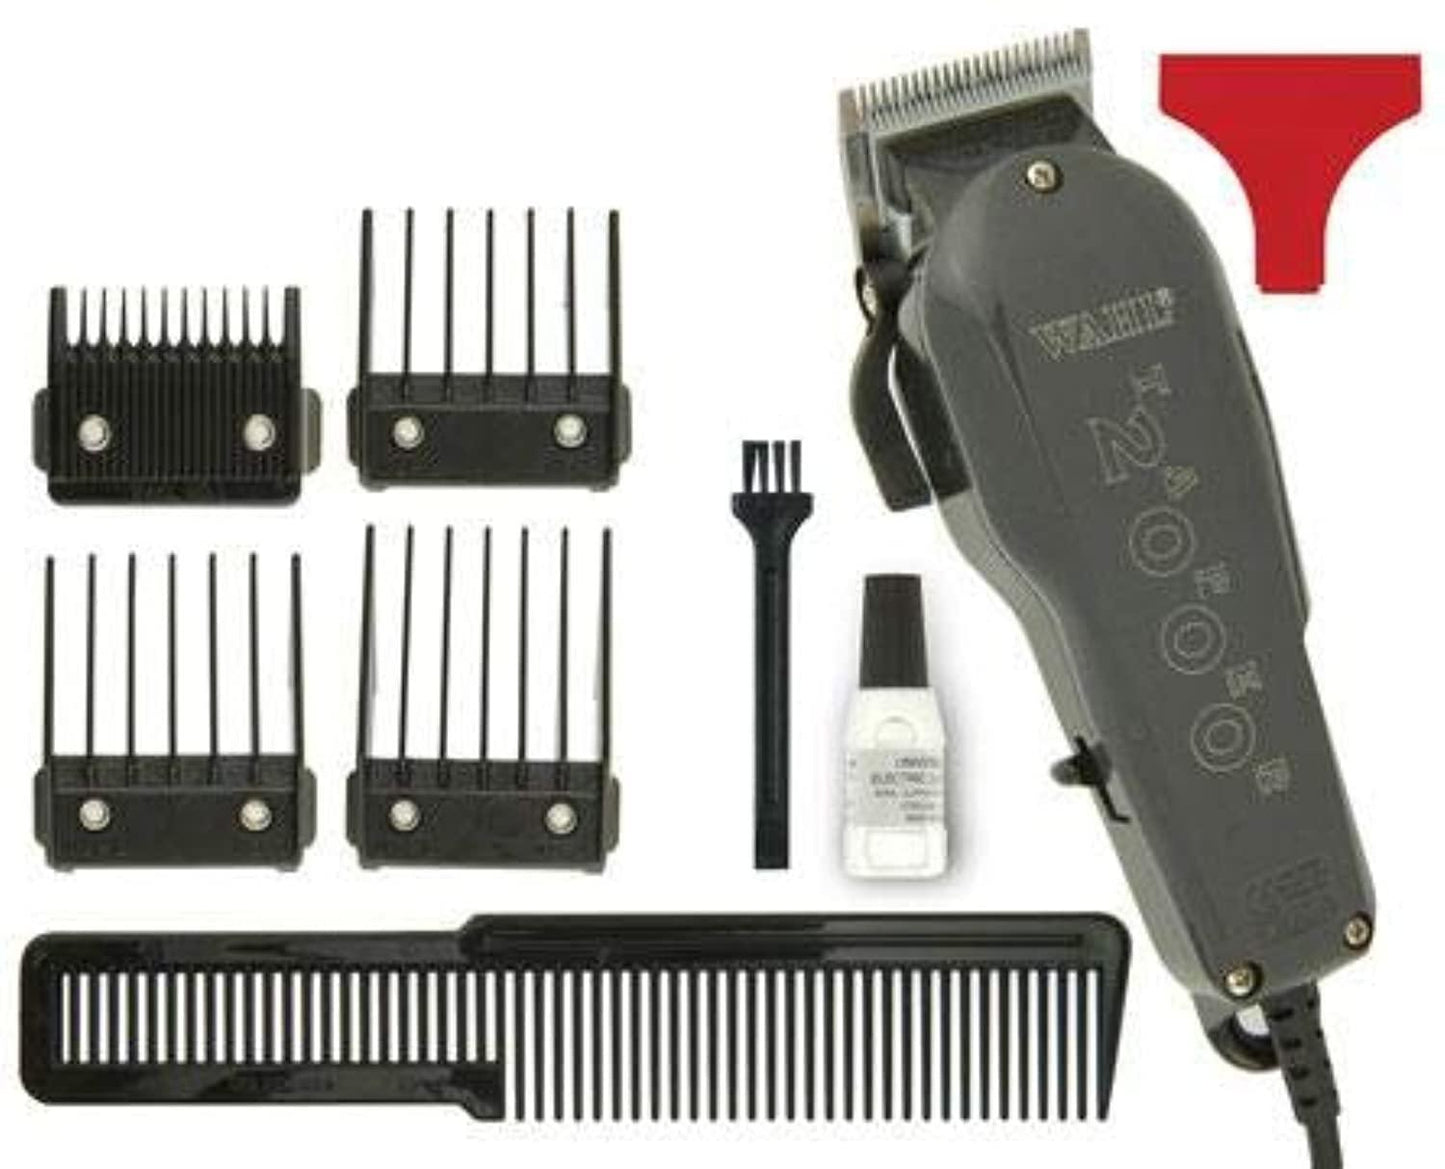 Wahl Taper 2000 Professional Hair Clipper - Beauty Bounty